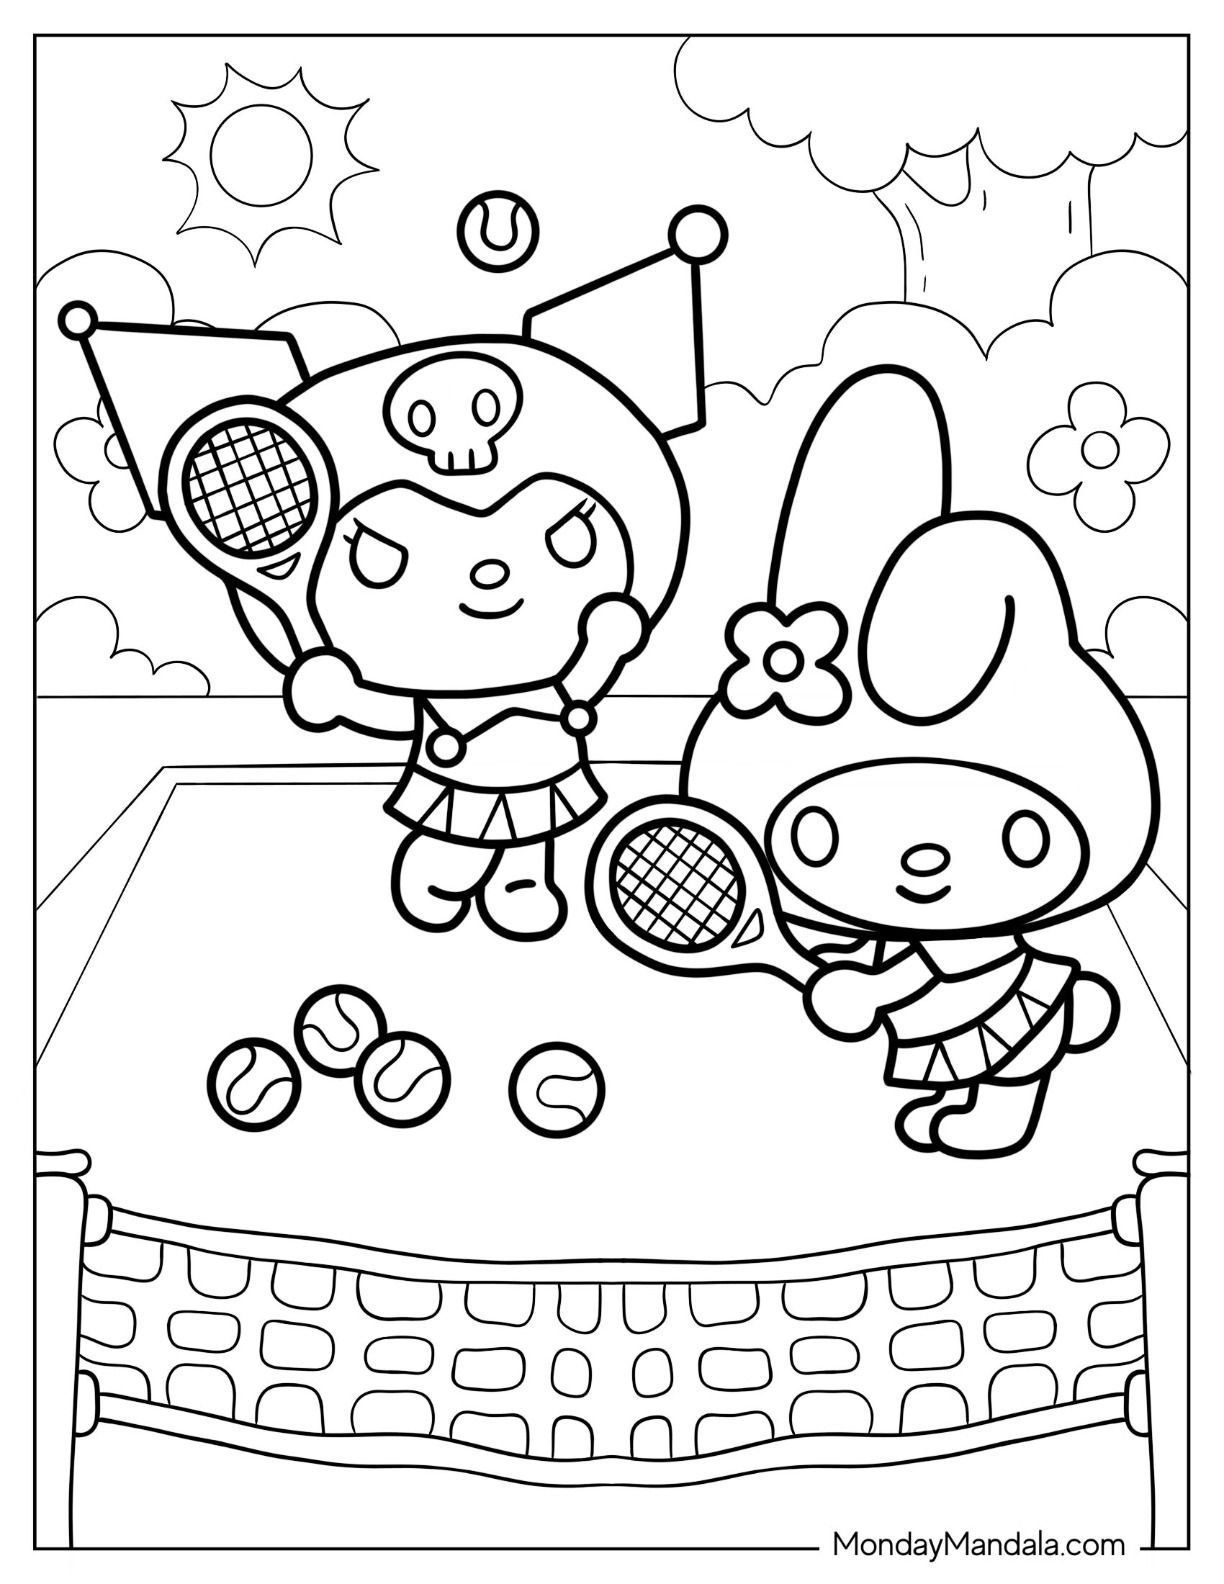 Kuromi coloring pages free pdf printables cute coloring pages kitty coloring hello kitty colouring pages